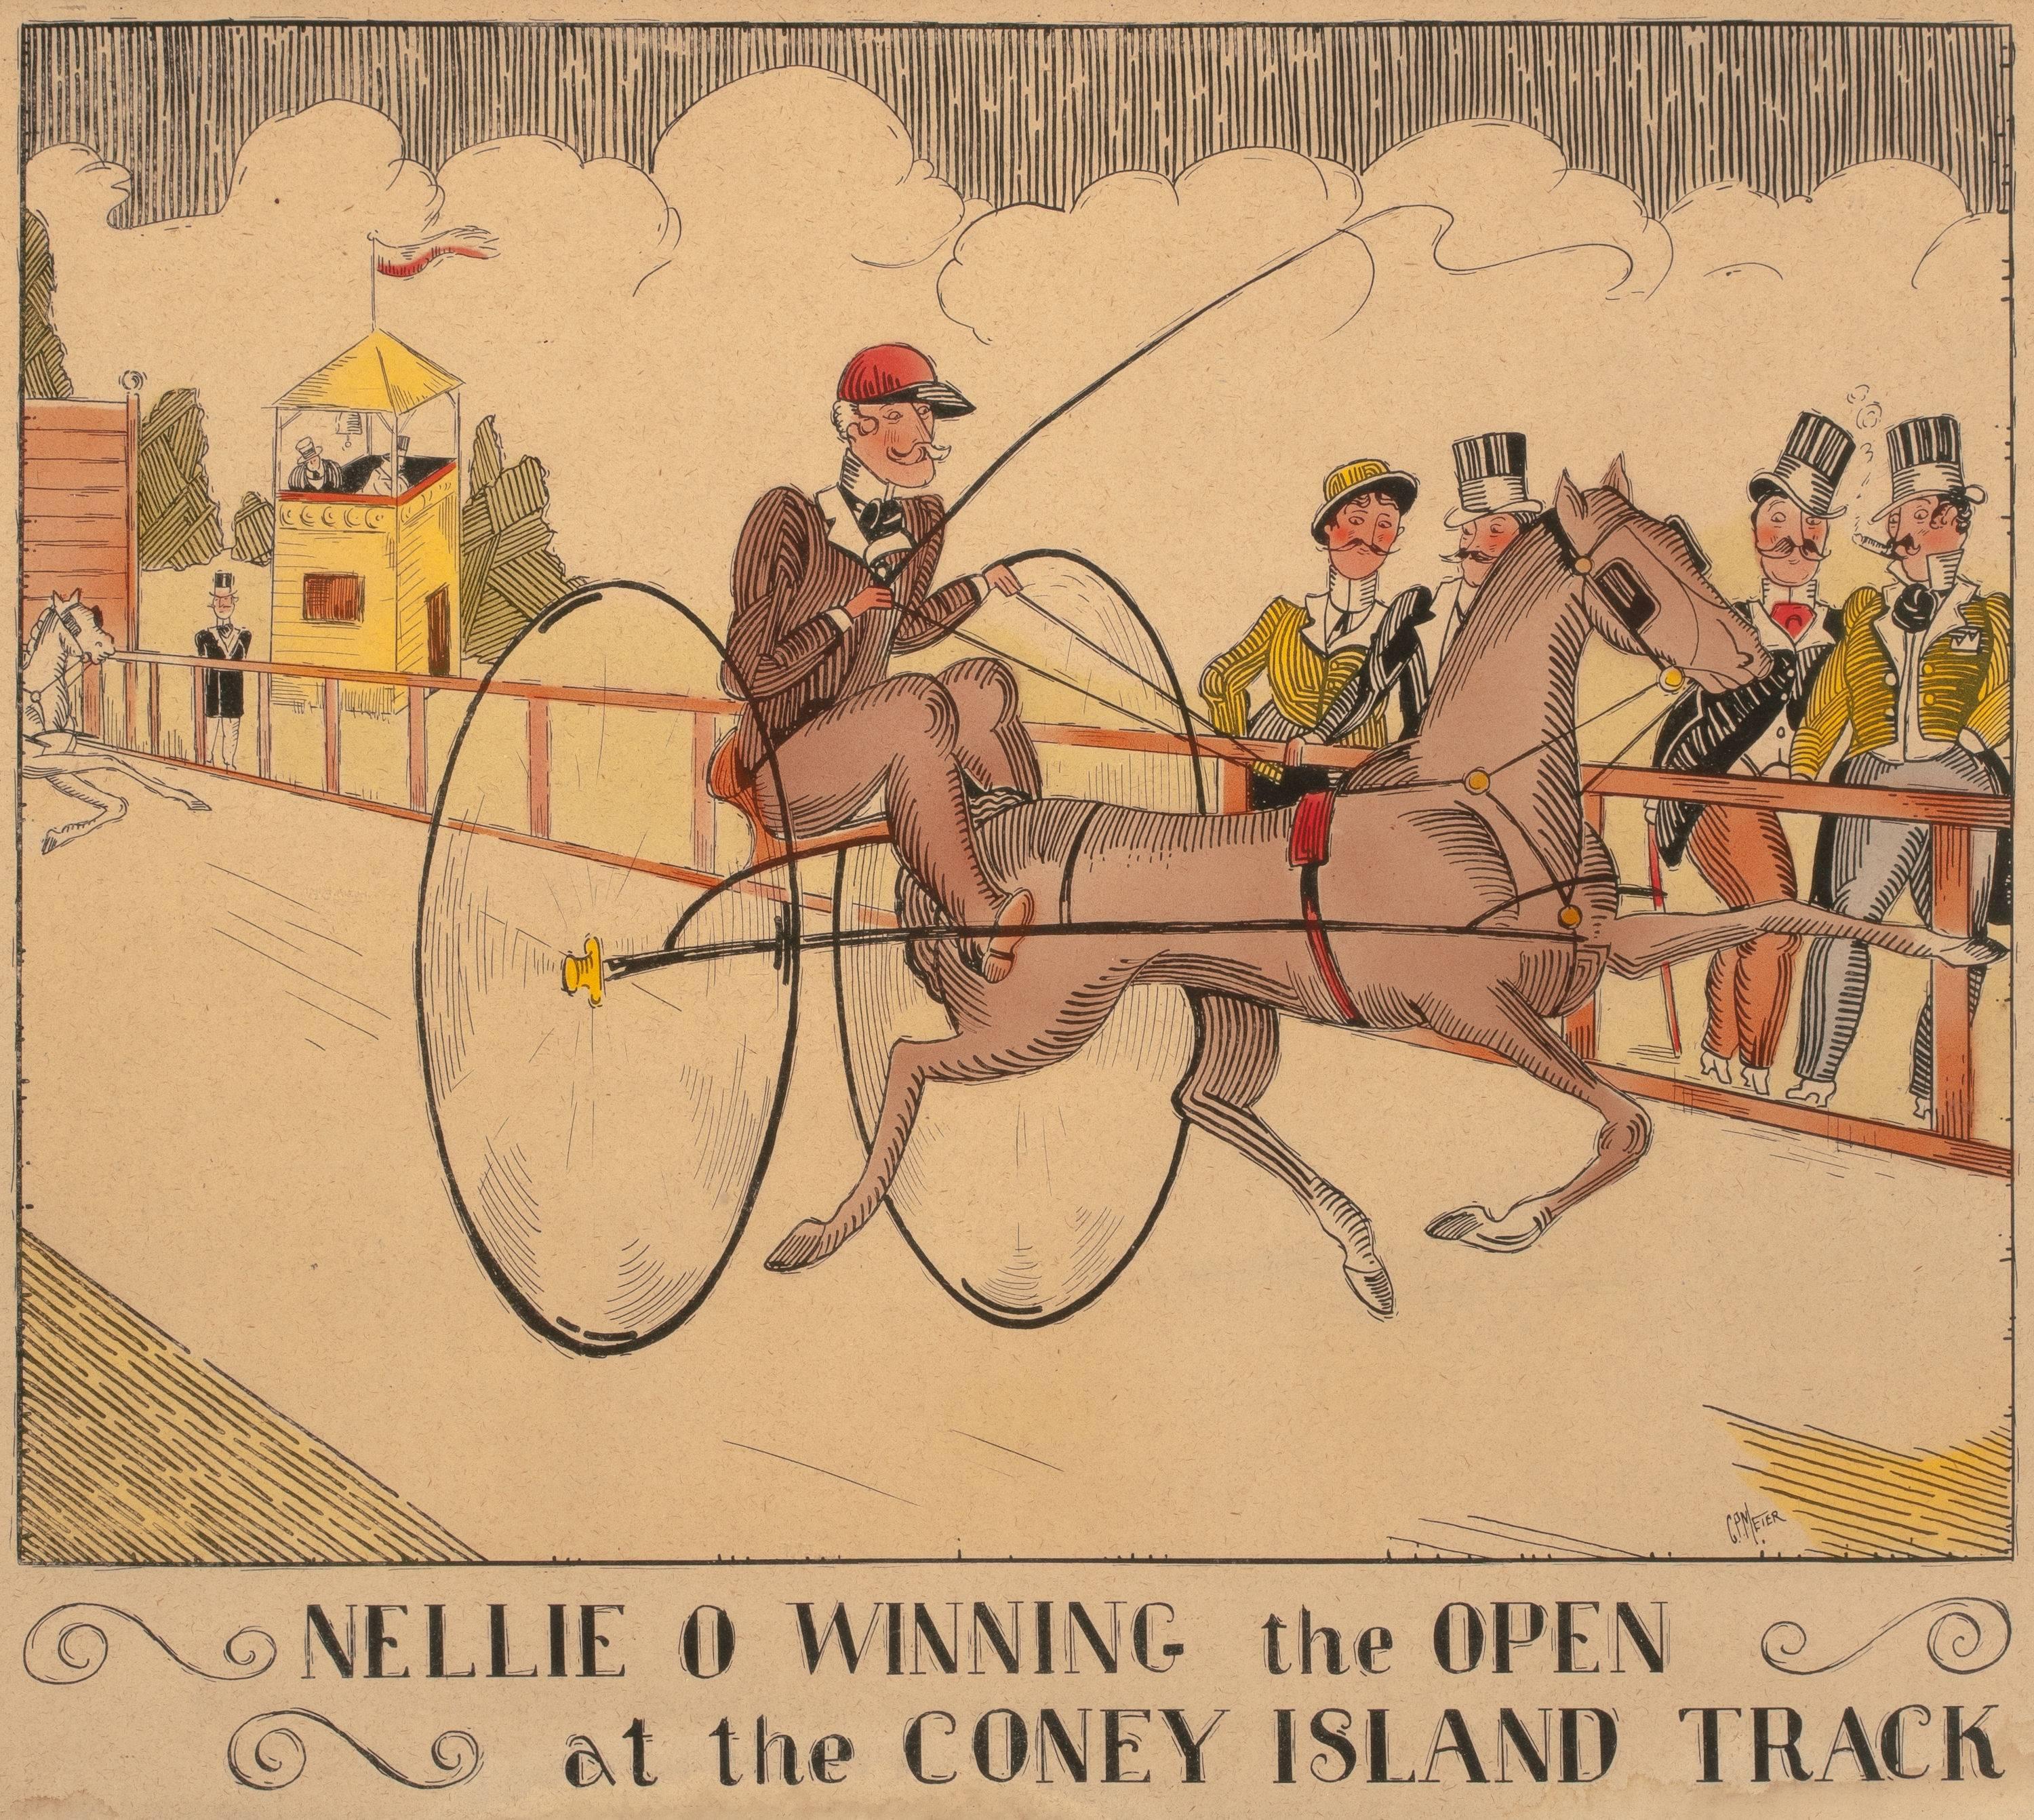 Nellie O Winning the Open at the Coney Island Track